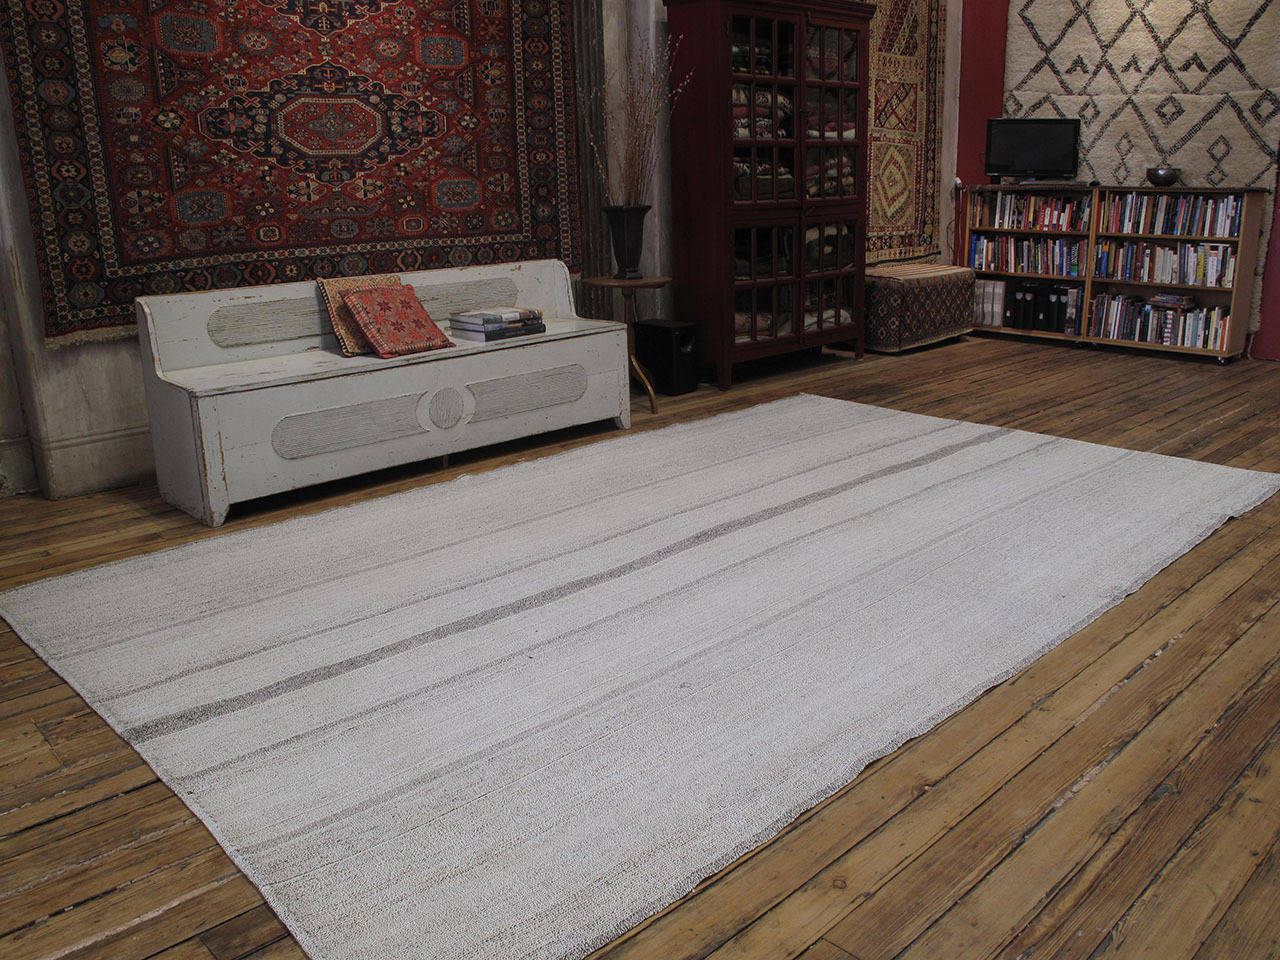 An old tribal flat-weave from Southeastern Turkey, woven for everyday utilitarian use, with a mixture of cotton and goat hair. This is an unusually large example of the type. Surprisingly elegant with great modern, Minimalist appeal.